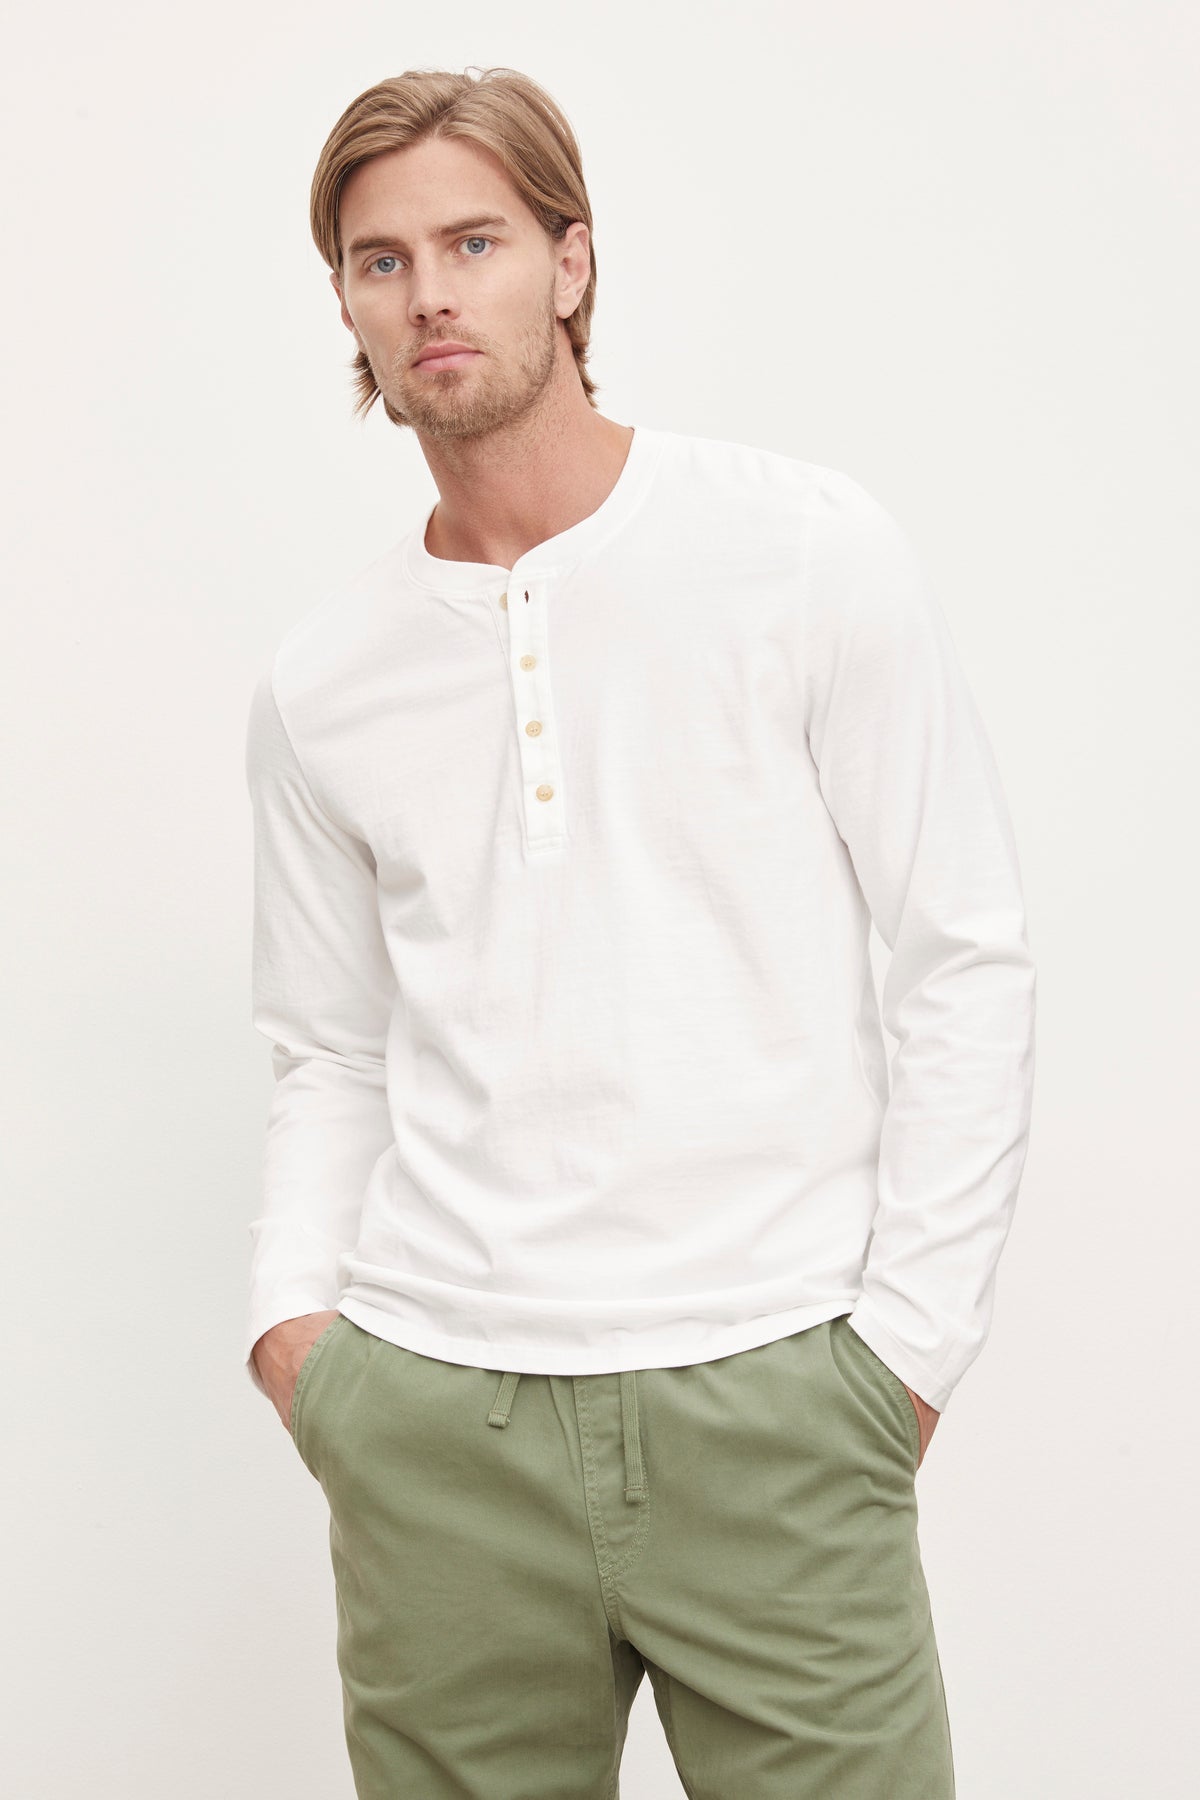   Man with blond hair wearing a white long-sleeve Velvet by Graham & Spencer HOLT HENLEY henley shirt with a four-button placket and green pants, standing against a plain background. 